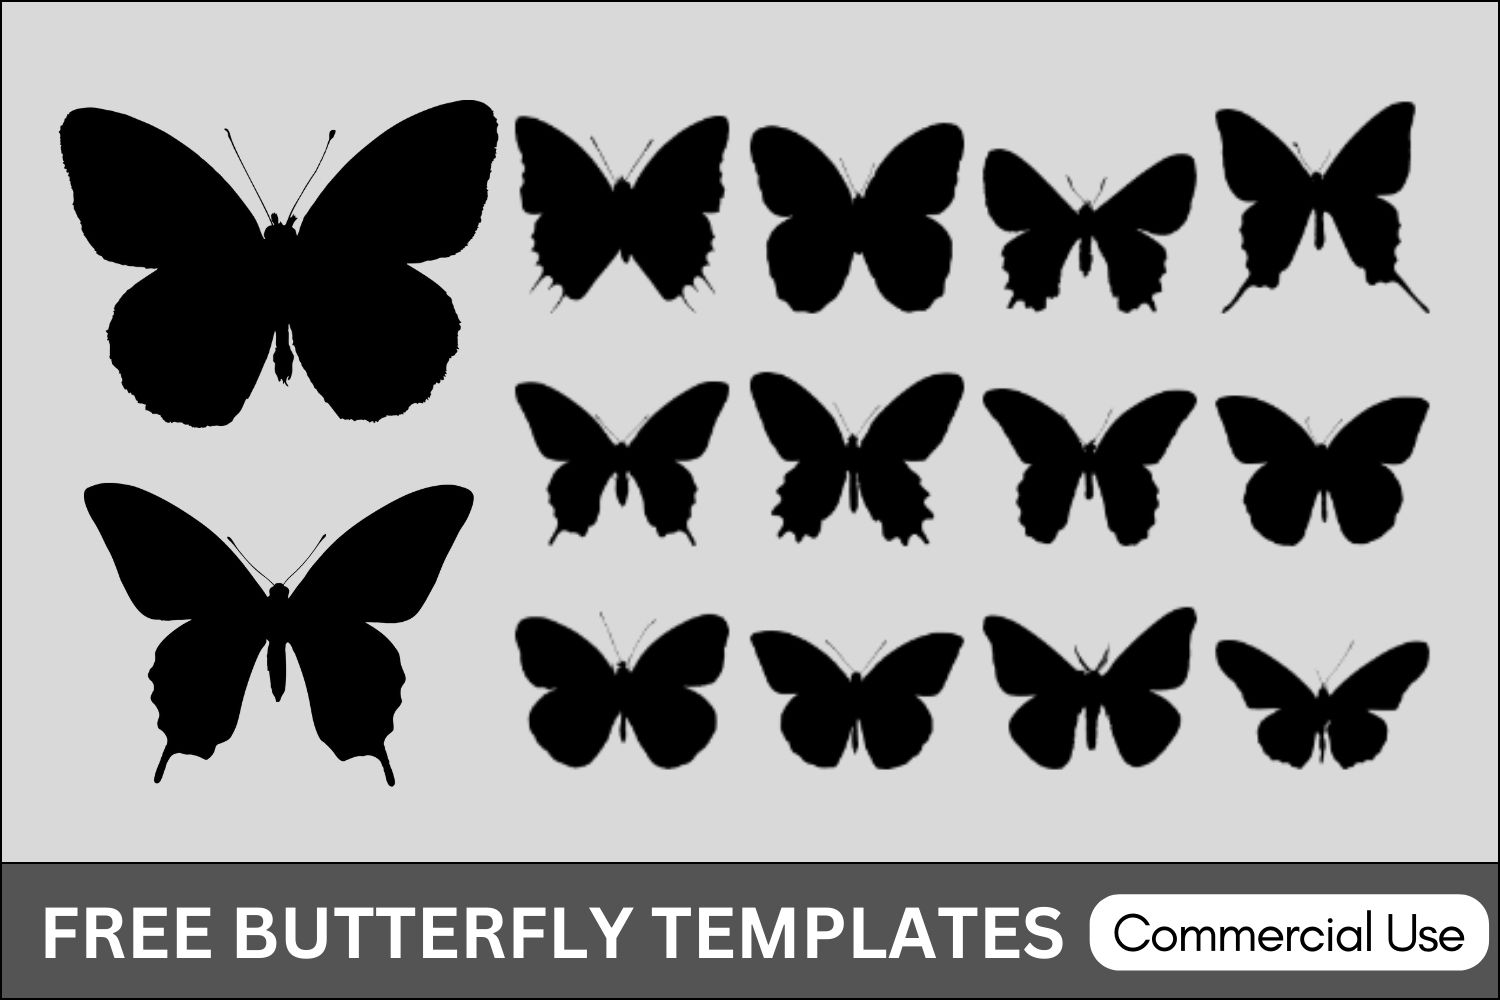 Butterfly SVG, Butterfly Silhouette, Butterfly Printables, Monarch Butterfly, Clipart, Cricut Cut file, Butterflies,  Butterfly Clipart, Download,  Butterfly Stencils, Free